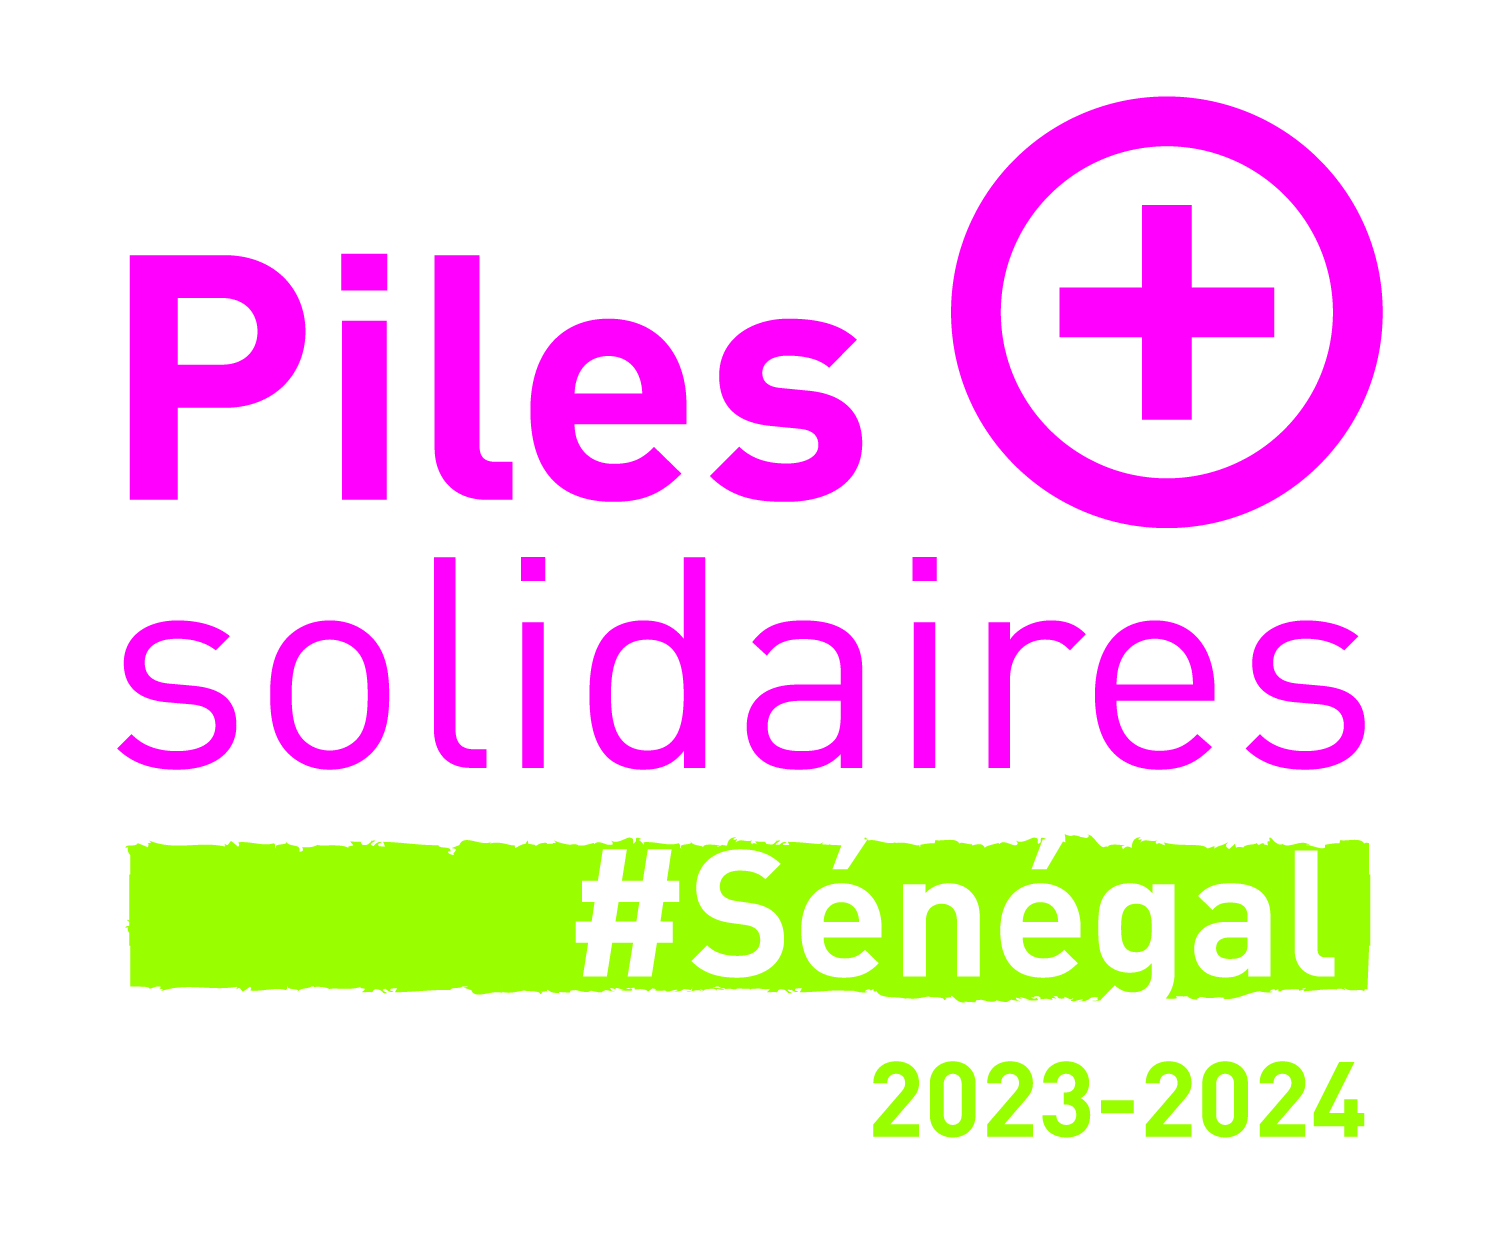 https://pilessolidaires.org/wp-content/uploads/2023/08/Logo-Piles-solidaires-Senegal_1500.jpg